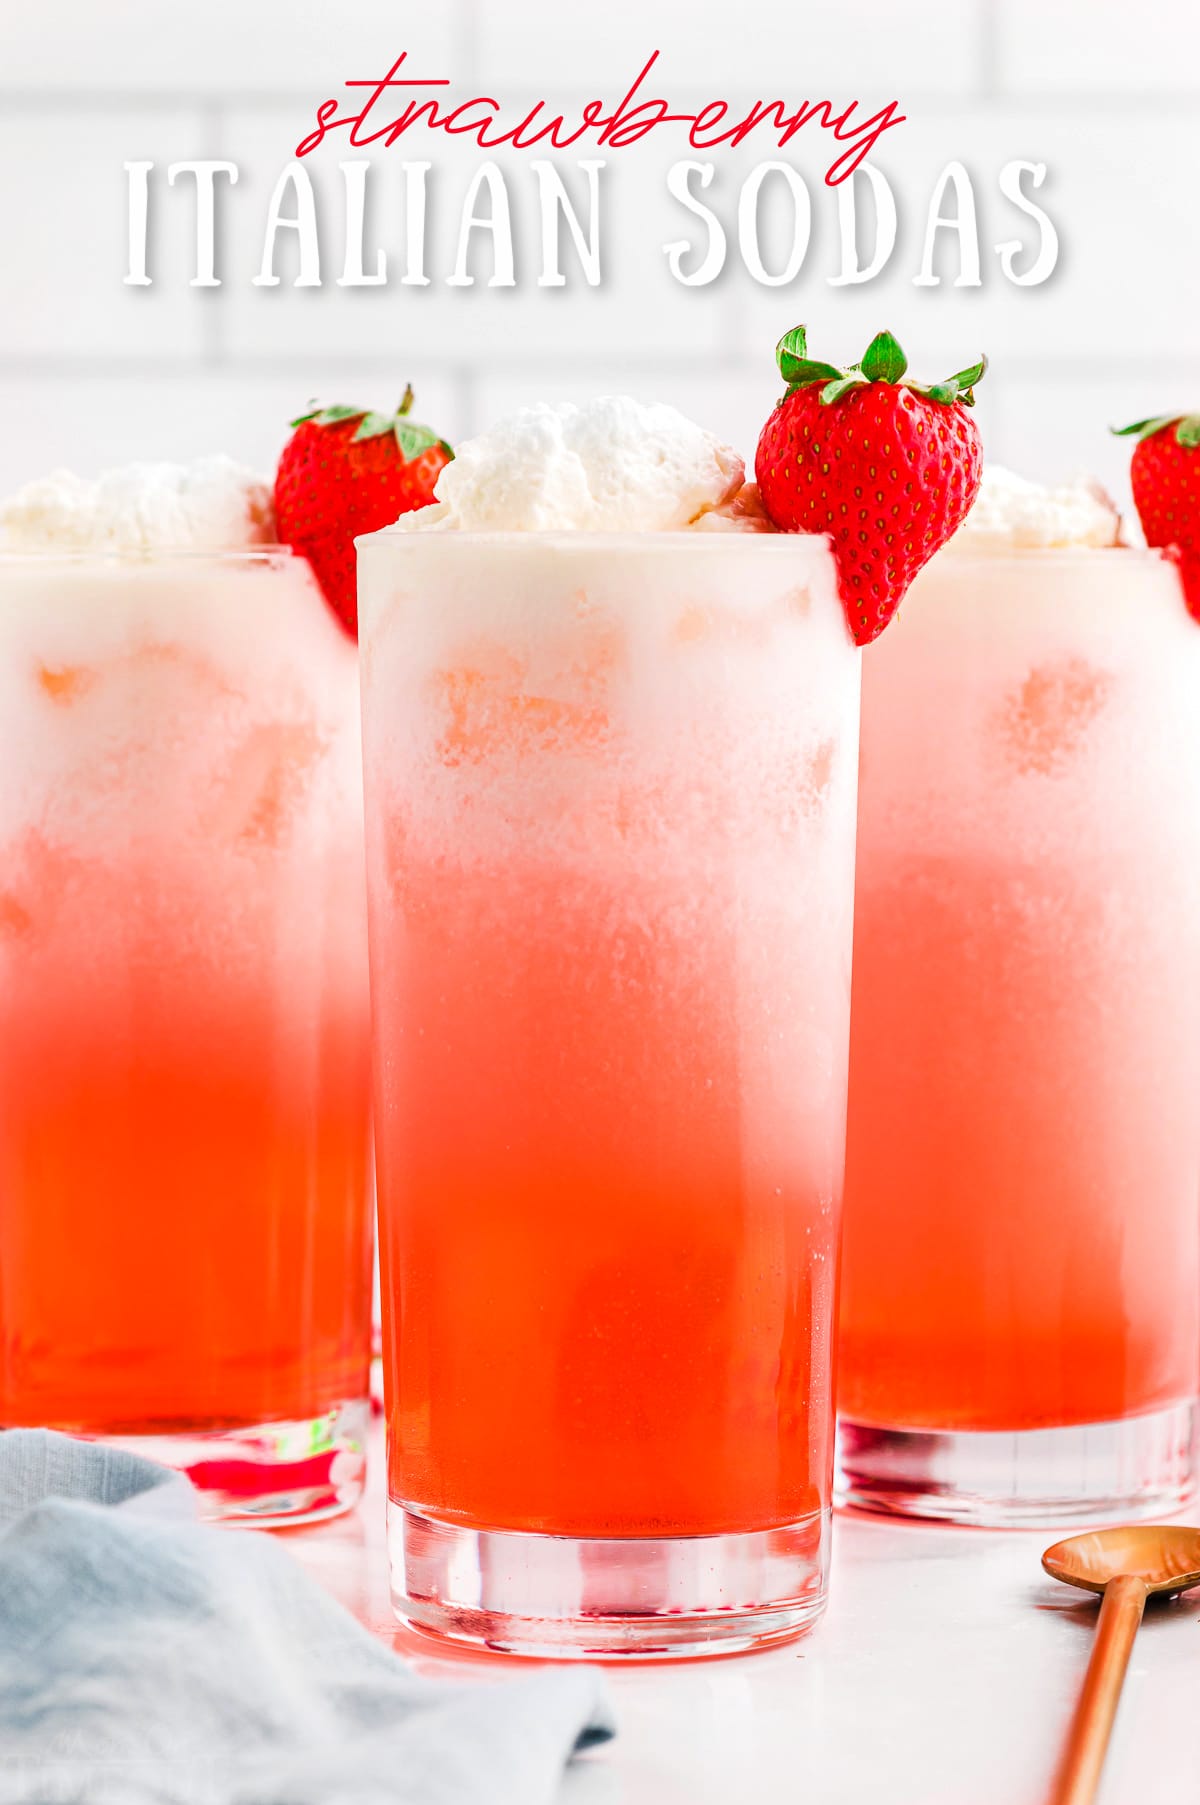 strawberry italian sodas in tall glasses garnished with whipped cream and fresh strawberries. title overlay at top of image.